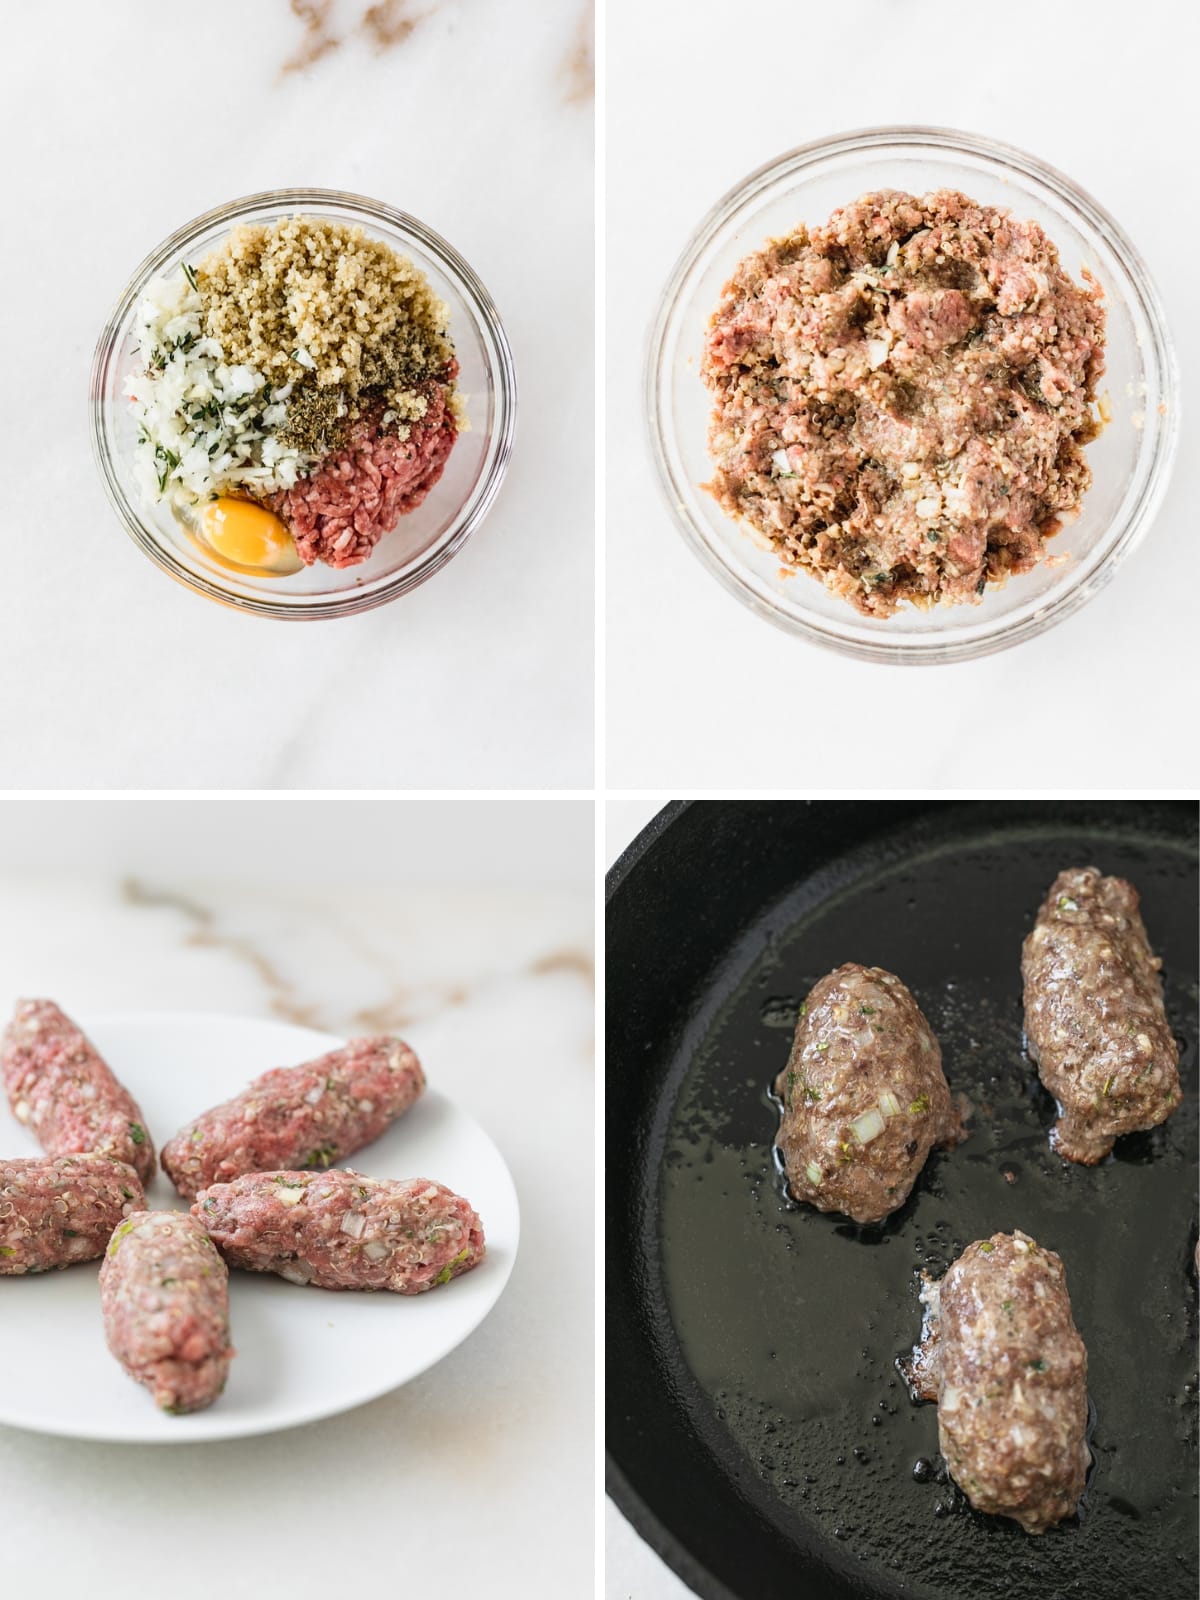 four image collage showing steps for making beef and quinoa baby meatballs.